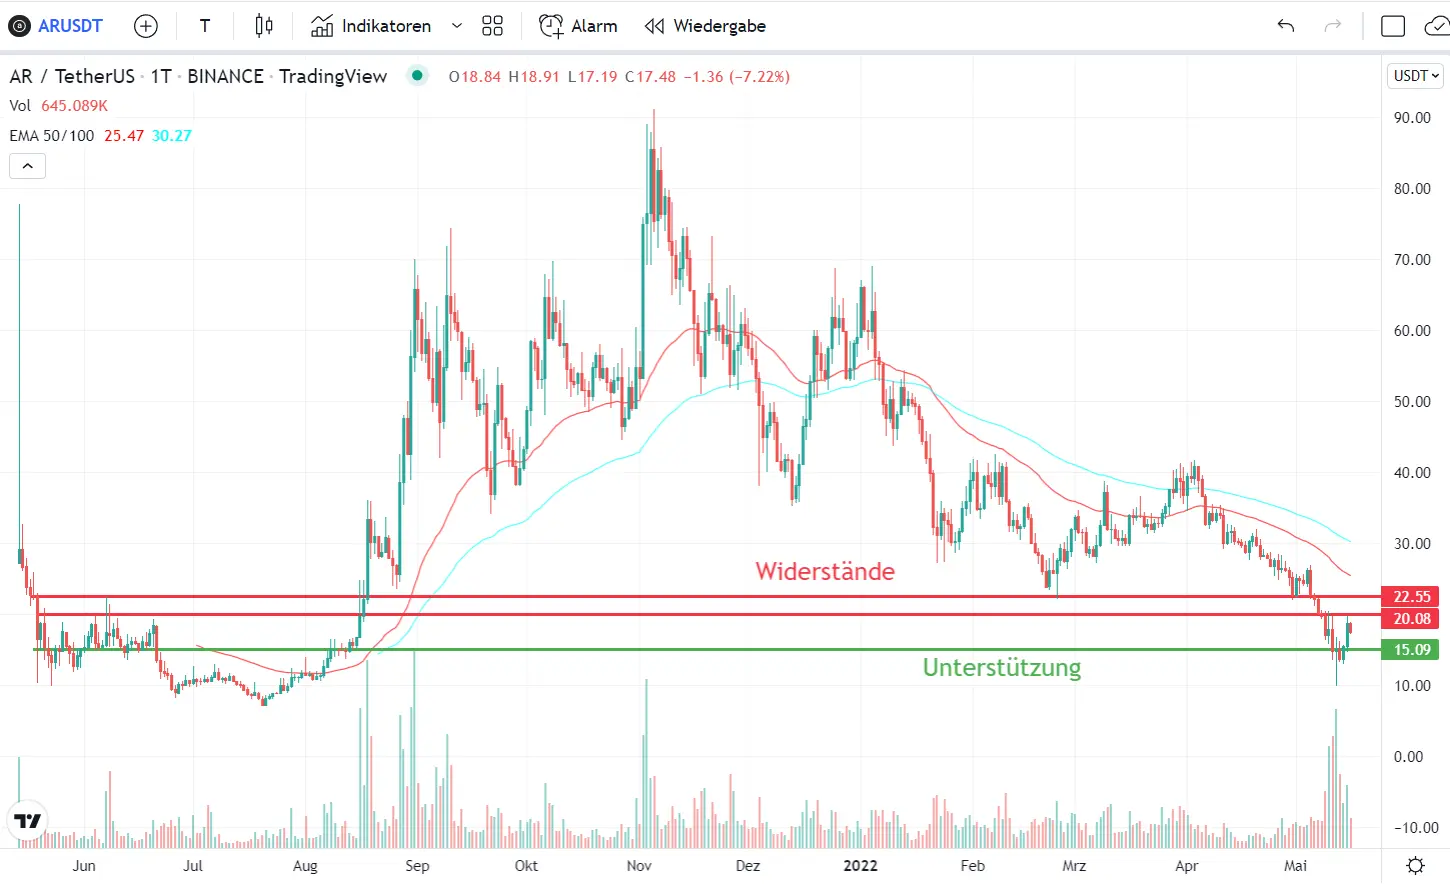 AR Kurs im 1-Tages-Chart in Tradingview